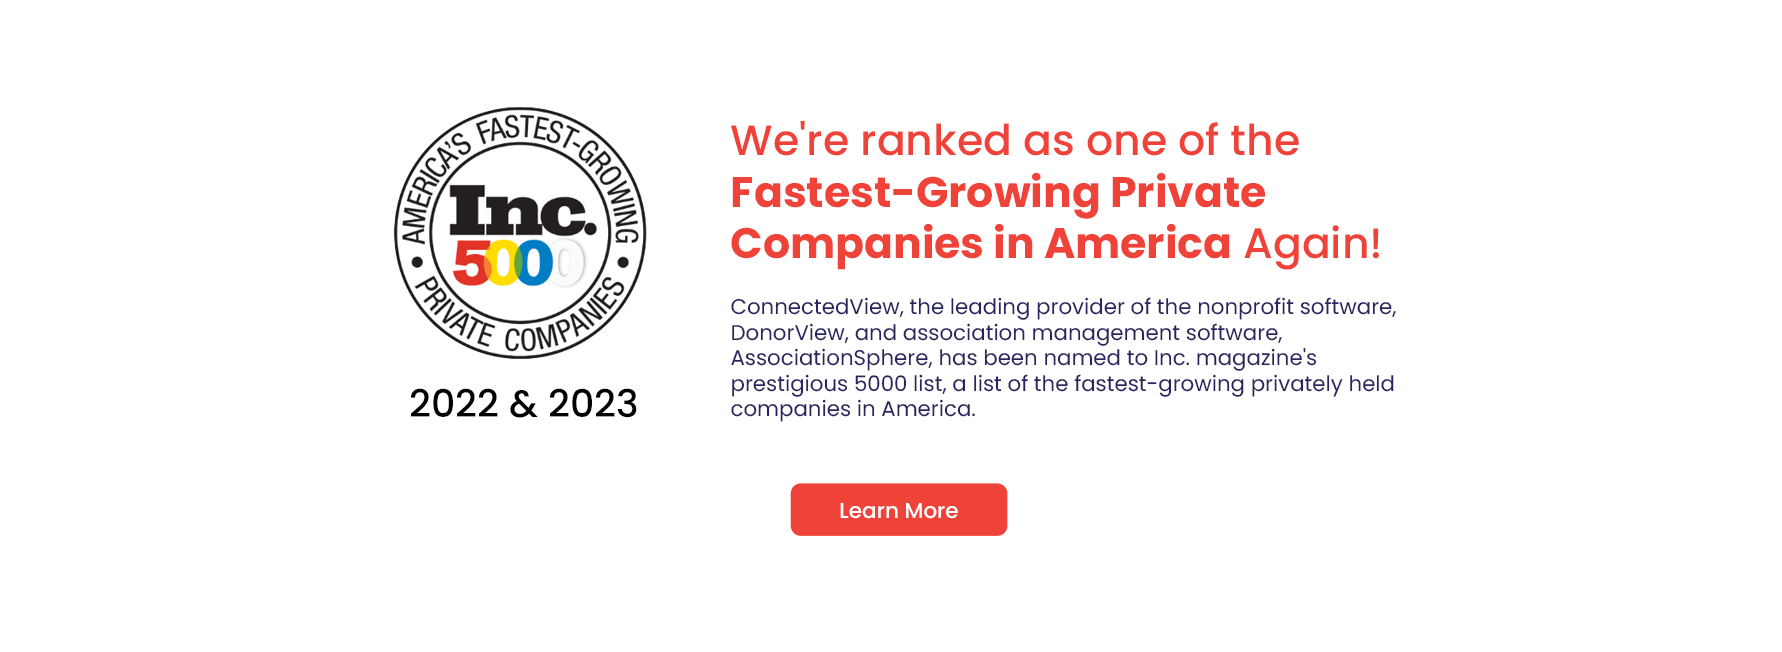 We're ranked as one of the Fastest-Growing Private Companies in America Again!